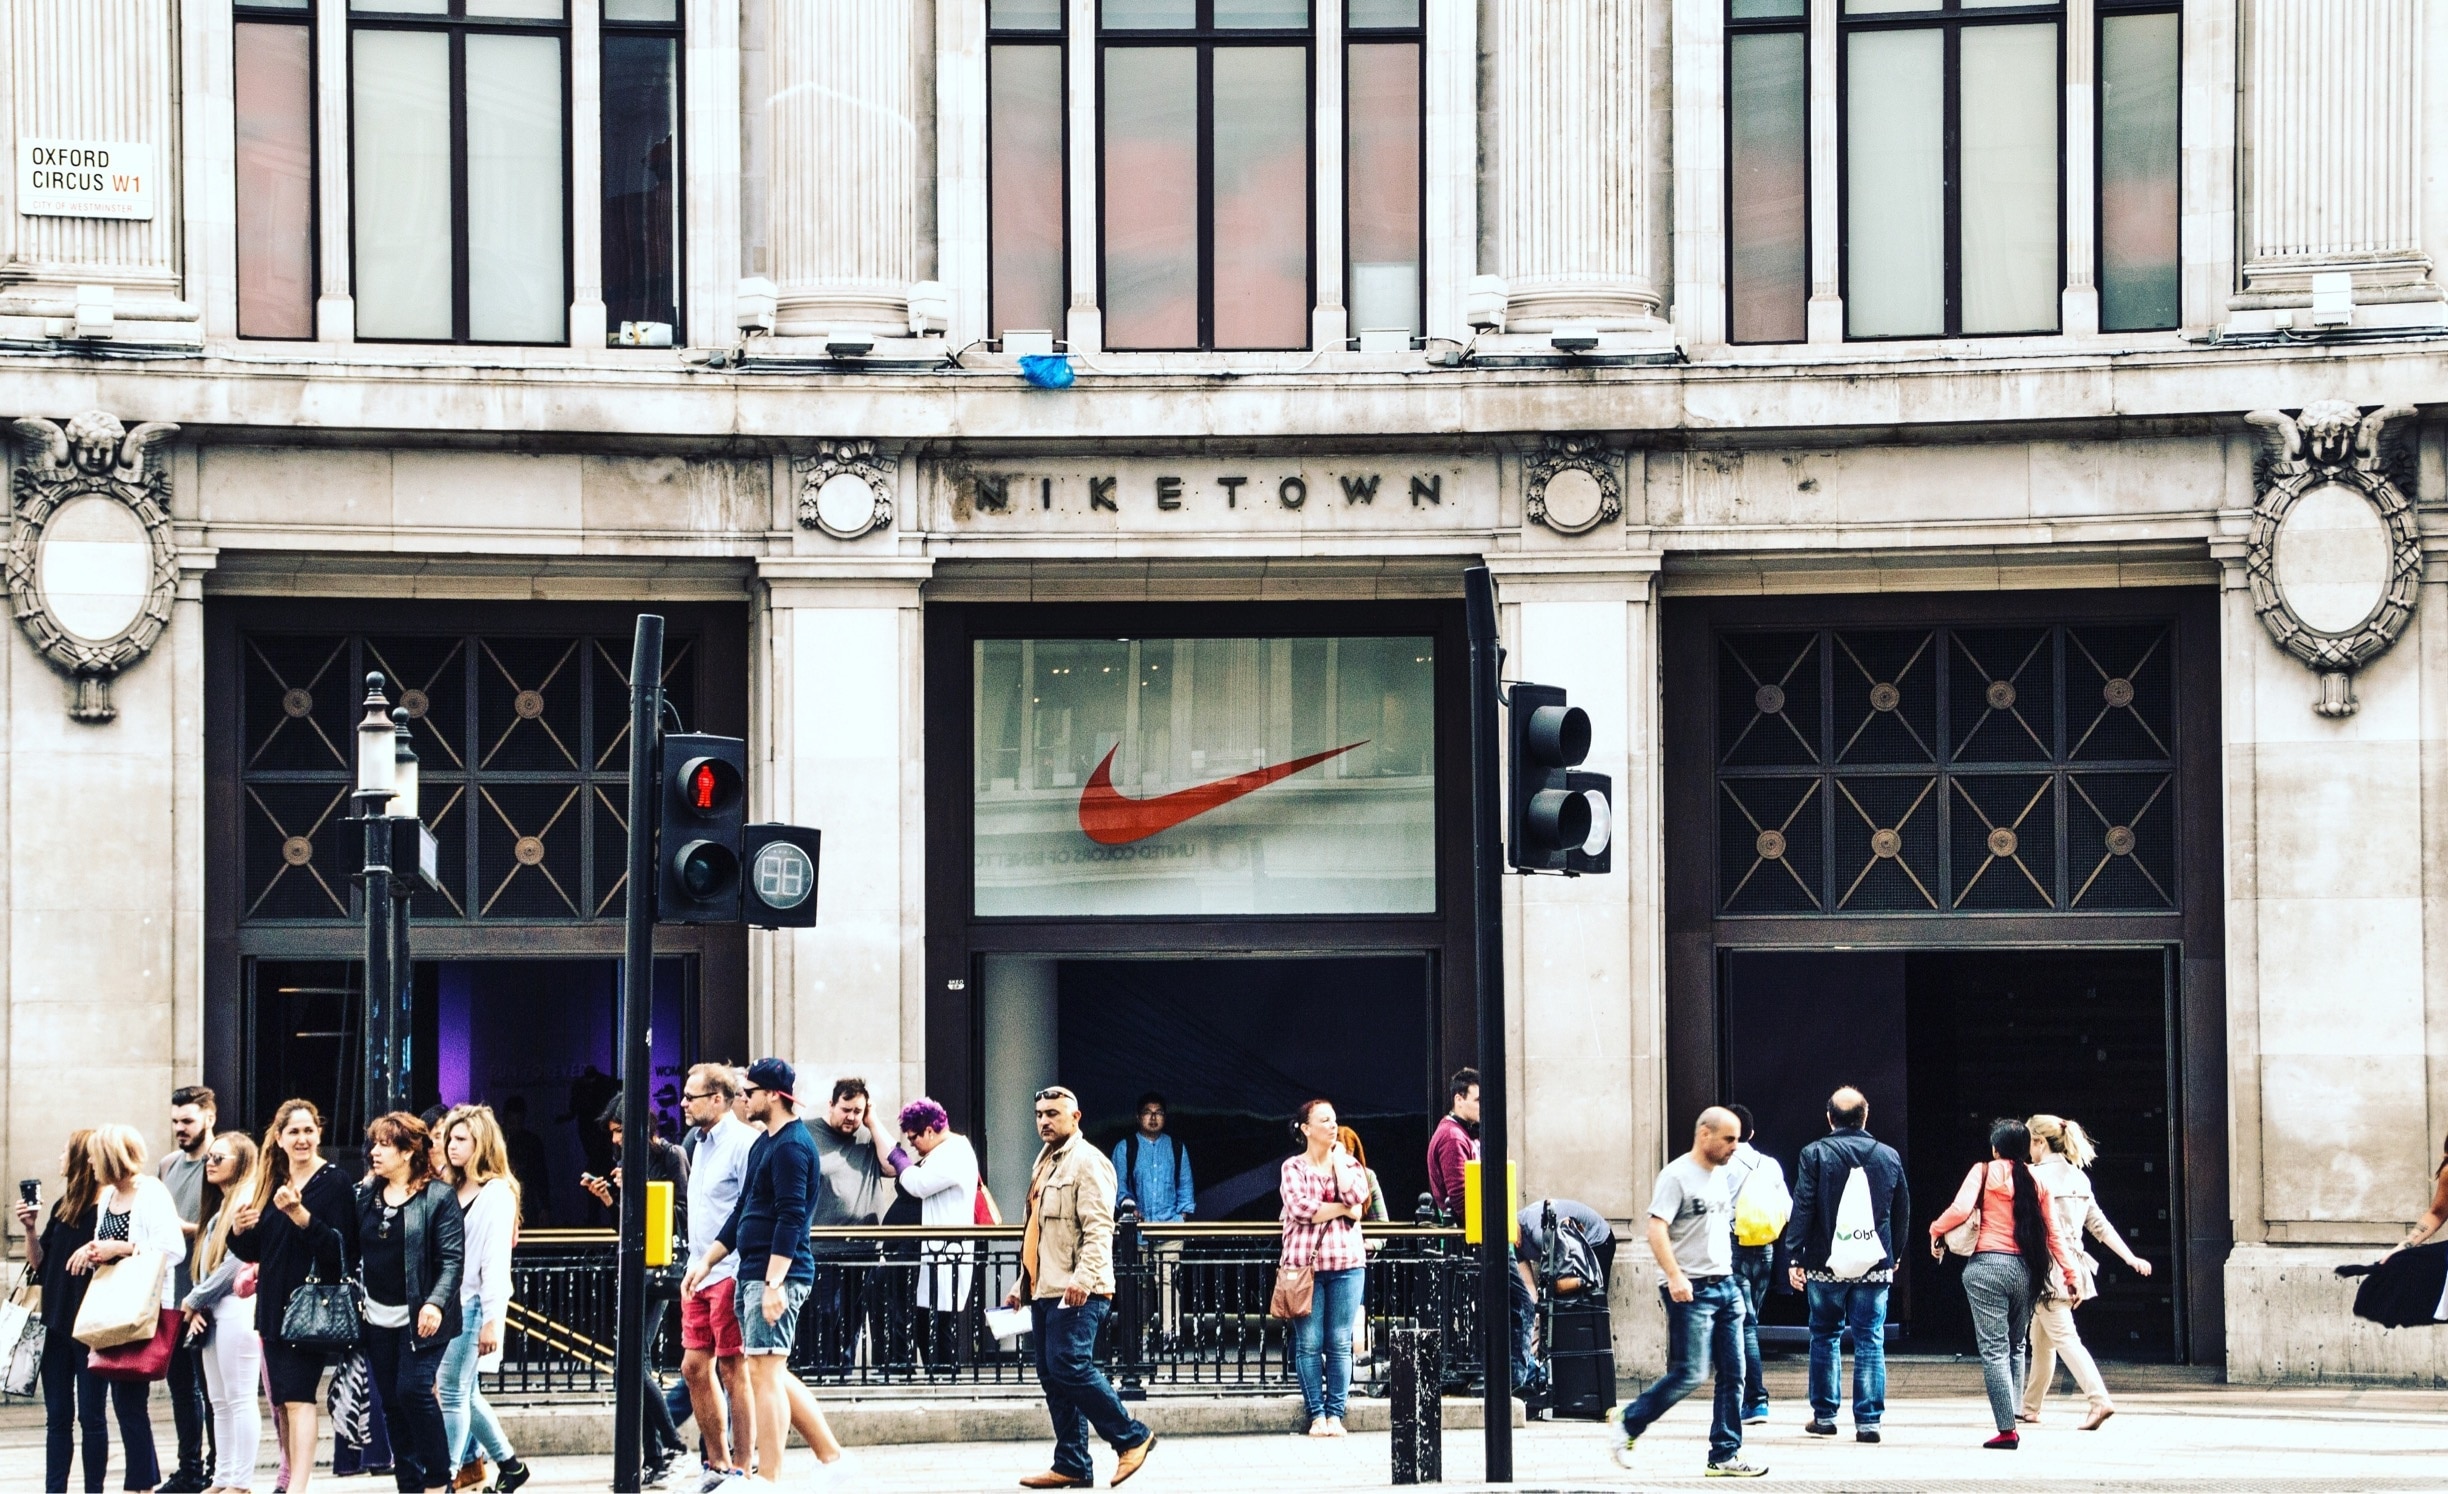 A Nike store in London's biggest shopping district. Cool architecture on the outside also.